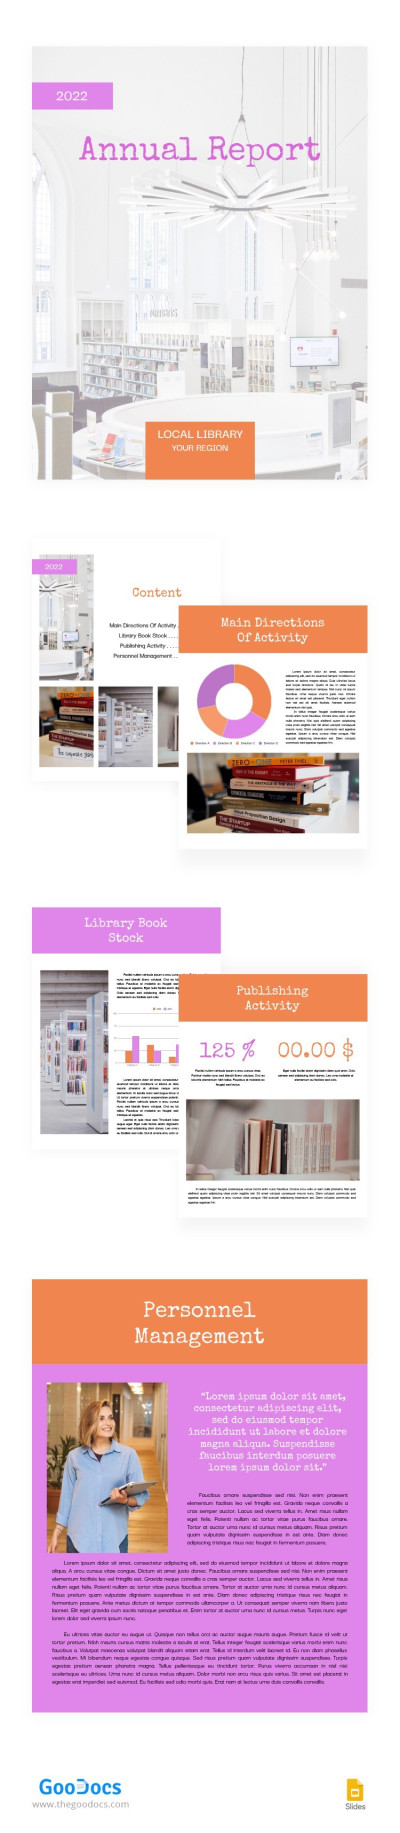 Local Library Annual Report Template